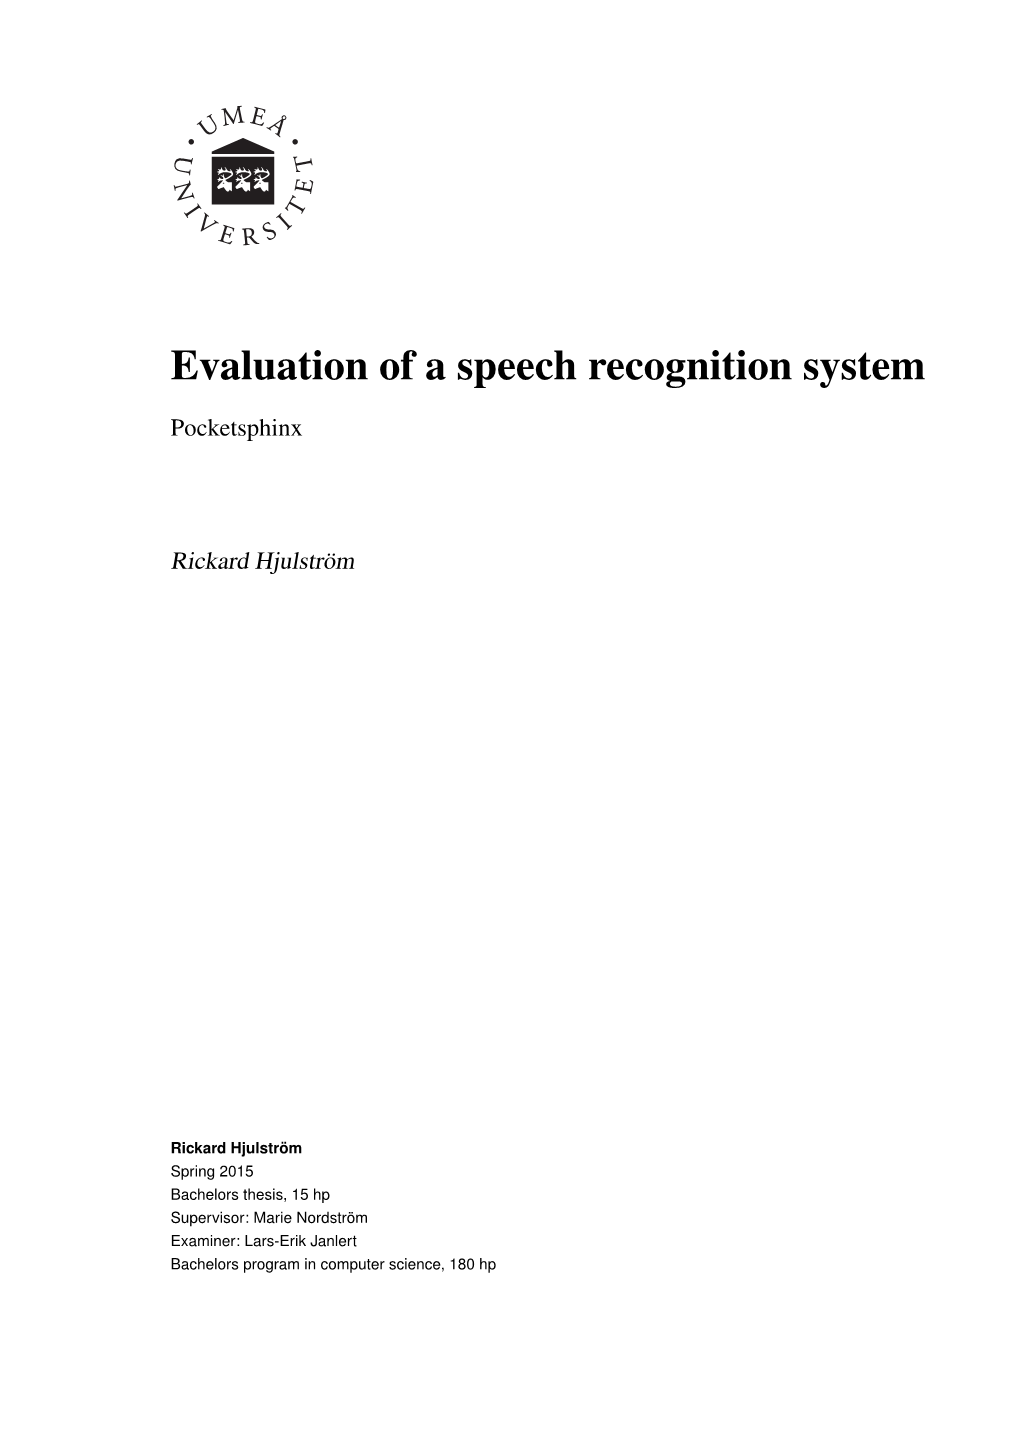 Evaluation of a Speech Recognition System